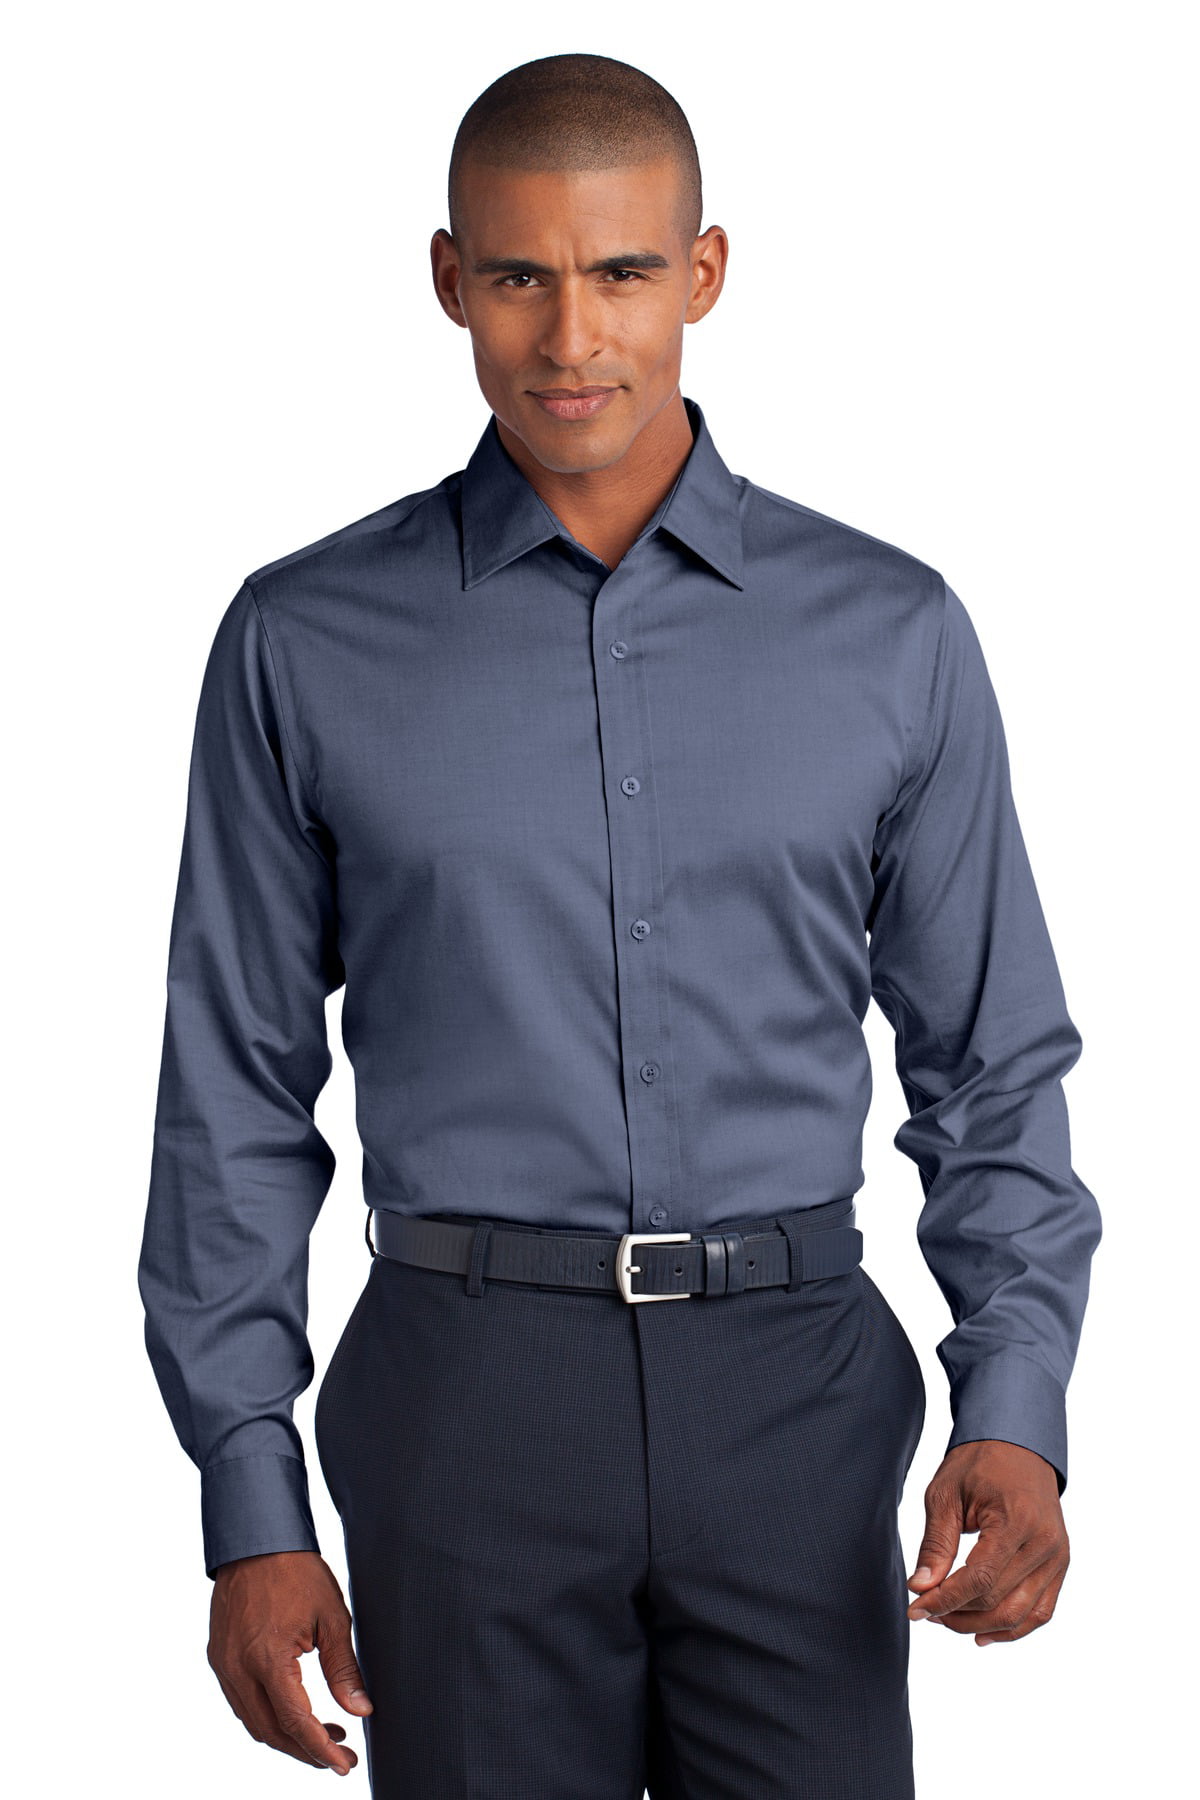 House Fit Non Iron Pinpoint Shirt-XS (Charcoal) - Walmart.com